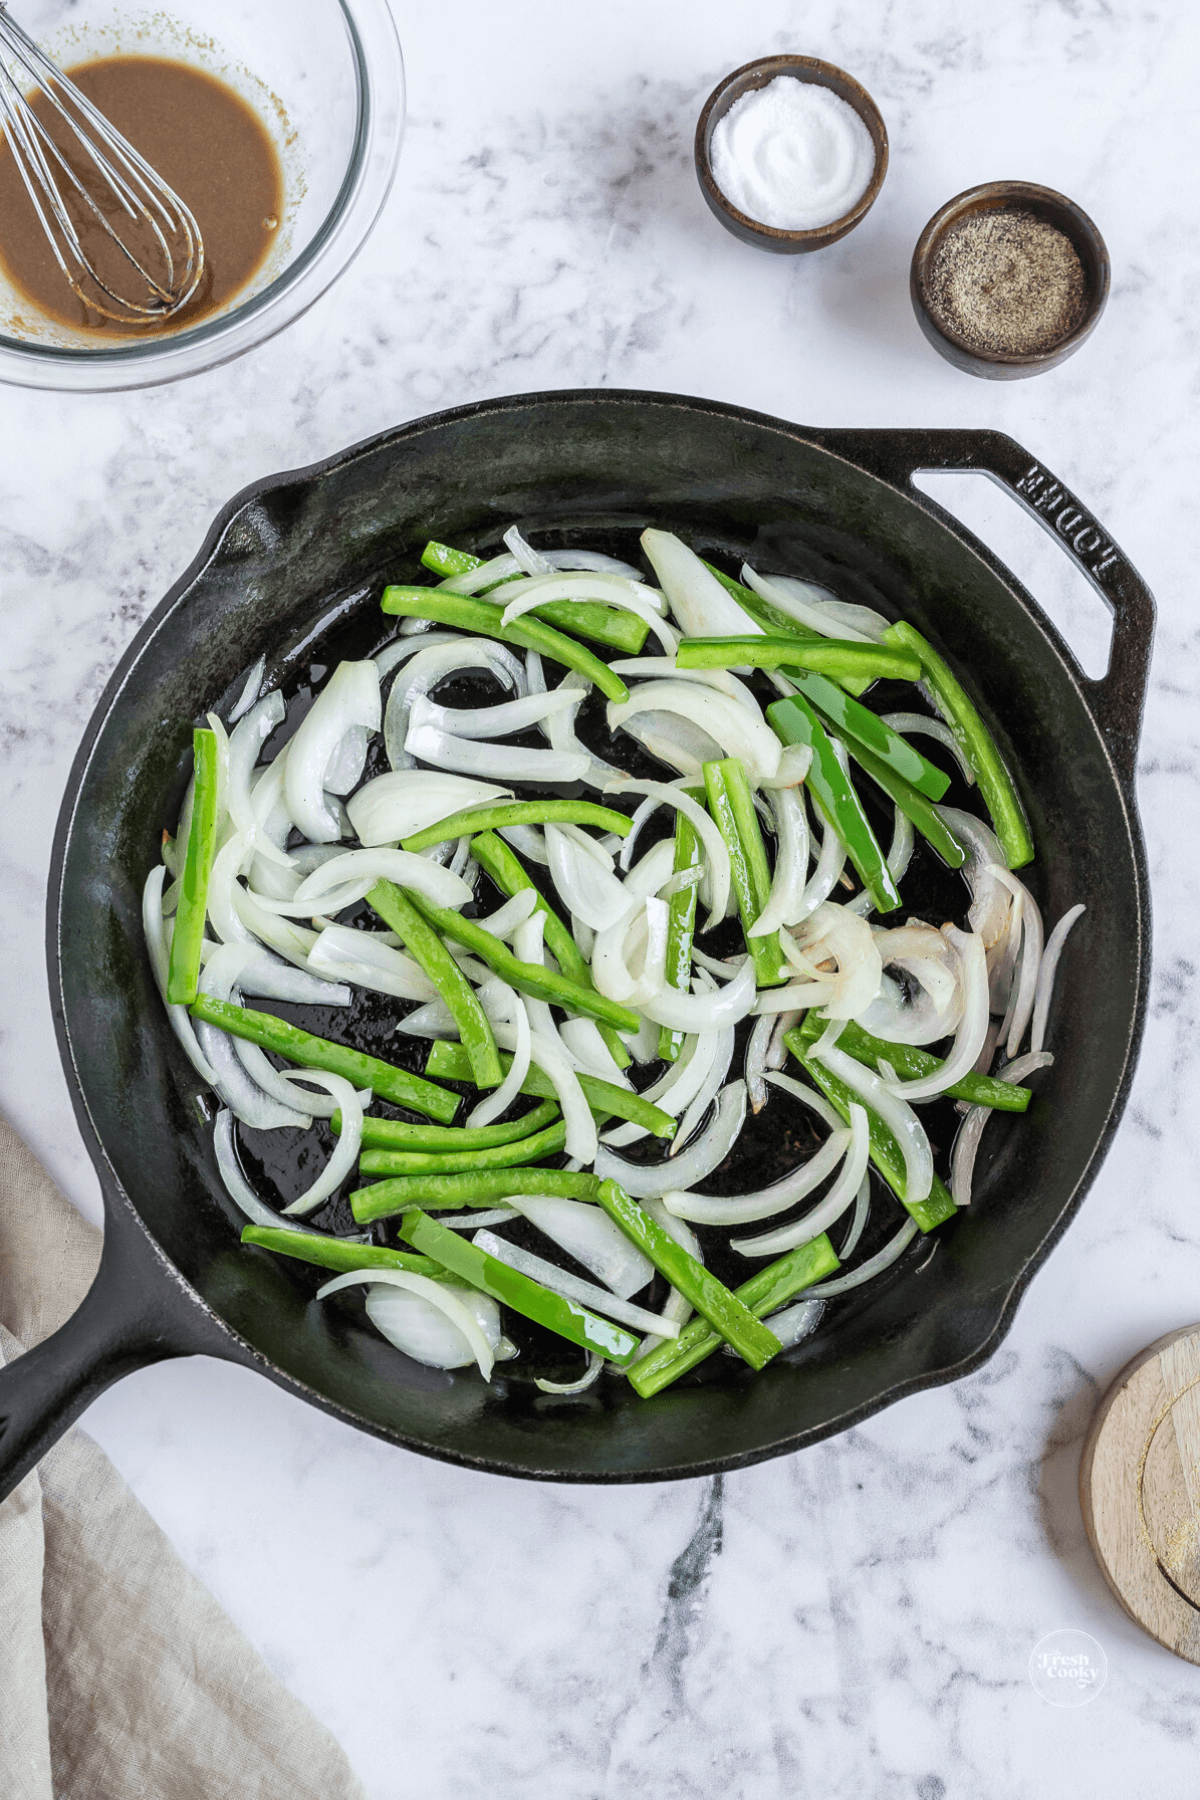 Caramelize onions and green peppers in skillet.